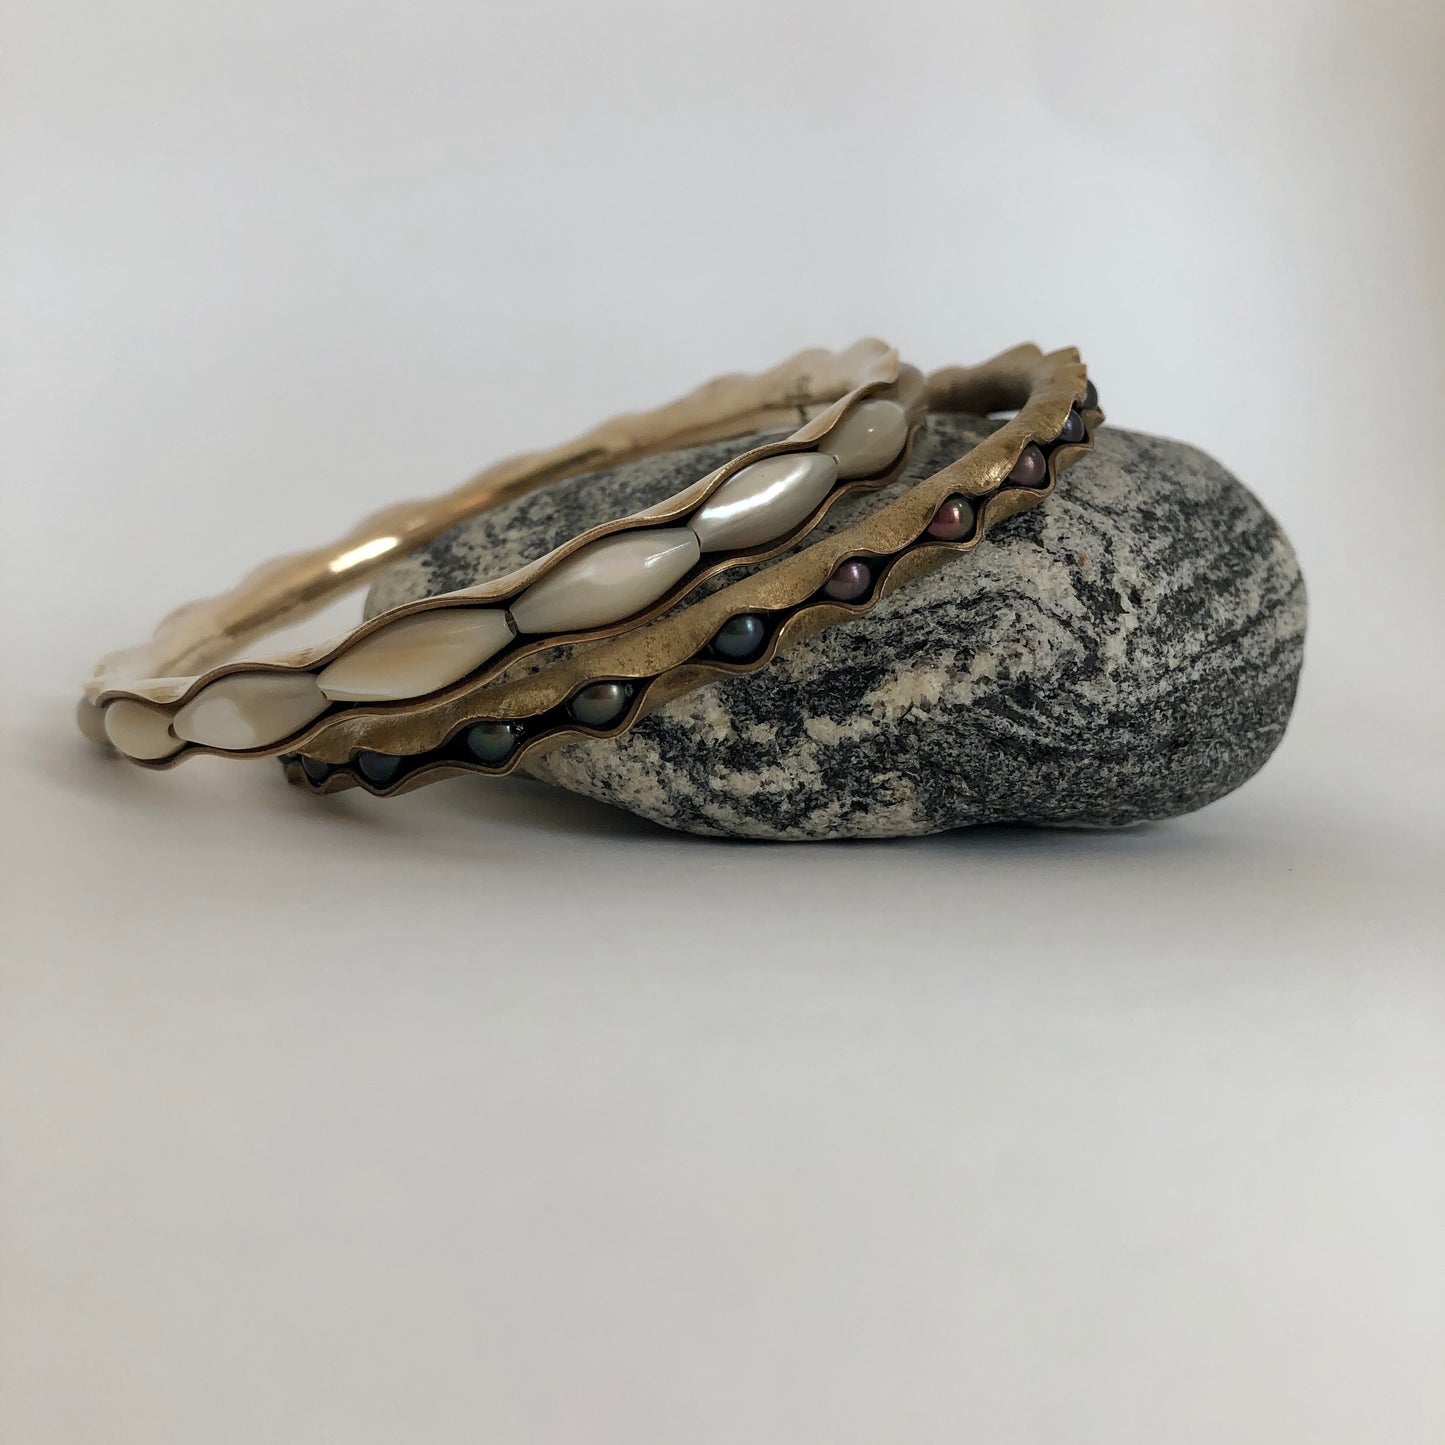 Bronze Bangle Bracelet with peacock pearls